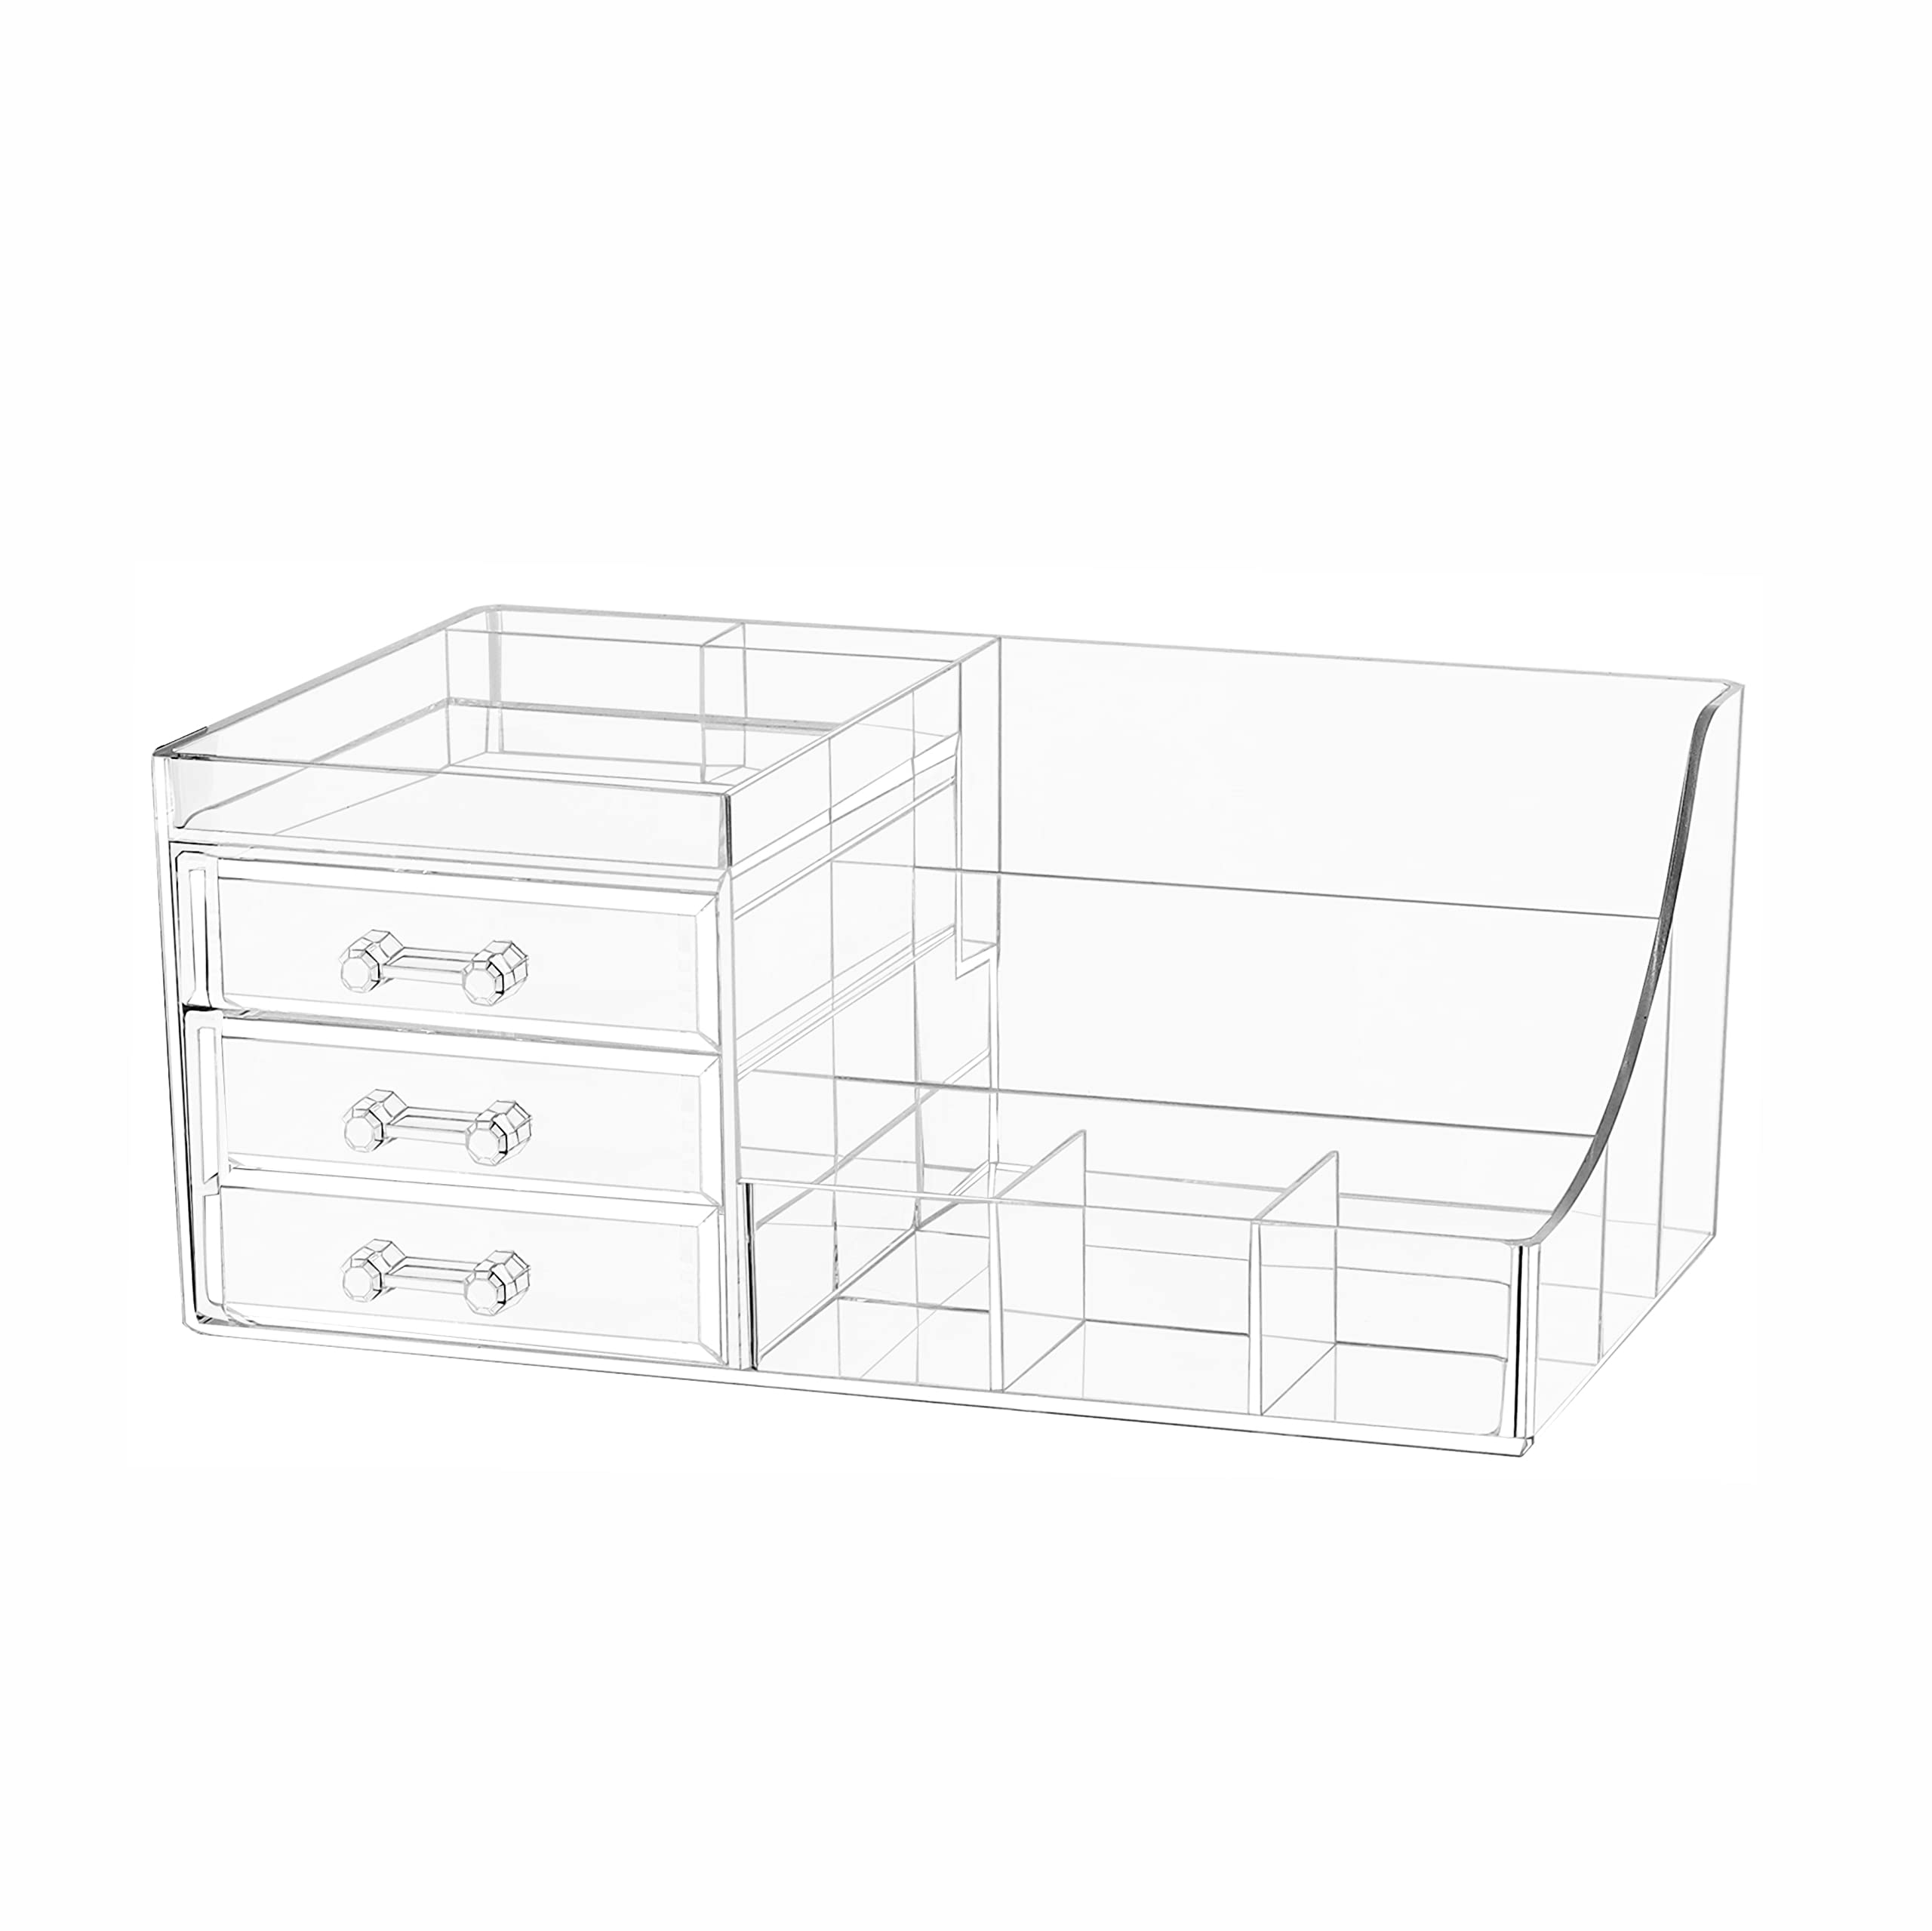 Cq acrylic Stackable Makeup Organizer With 3 Drawers,Acrylic Bathroom  Organizers Storage,Clear Storage Bins for  Lipstick,Brushes,Lotions,Eyeshadow,Nail Polish and Jewelry